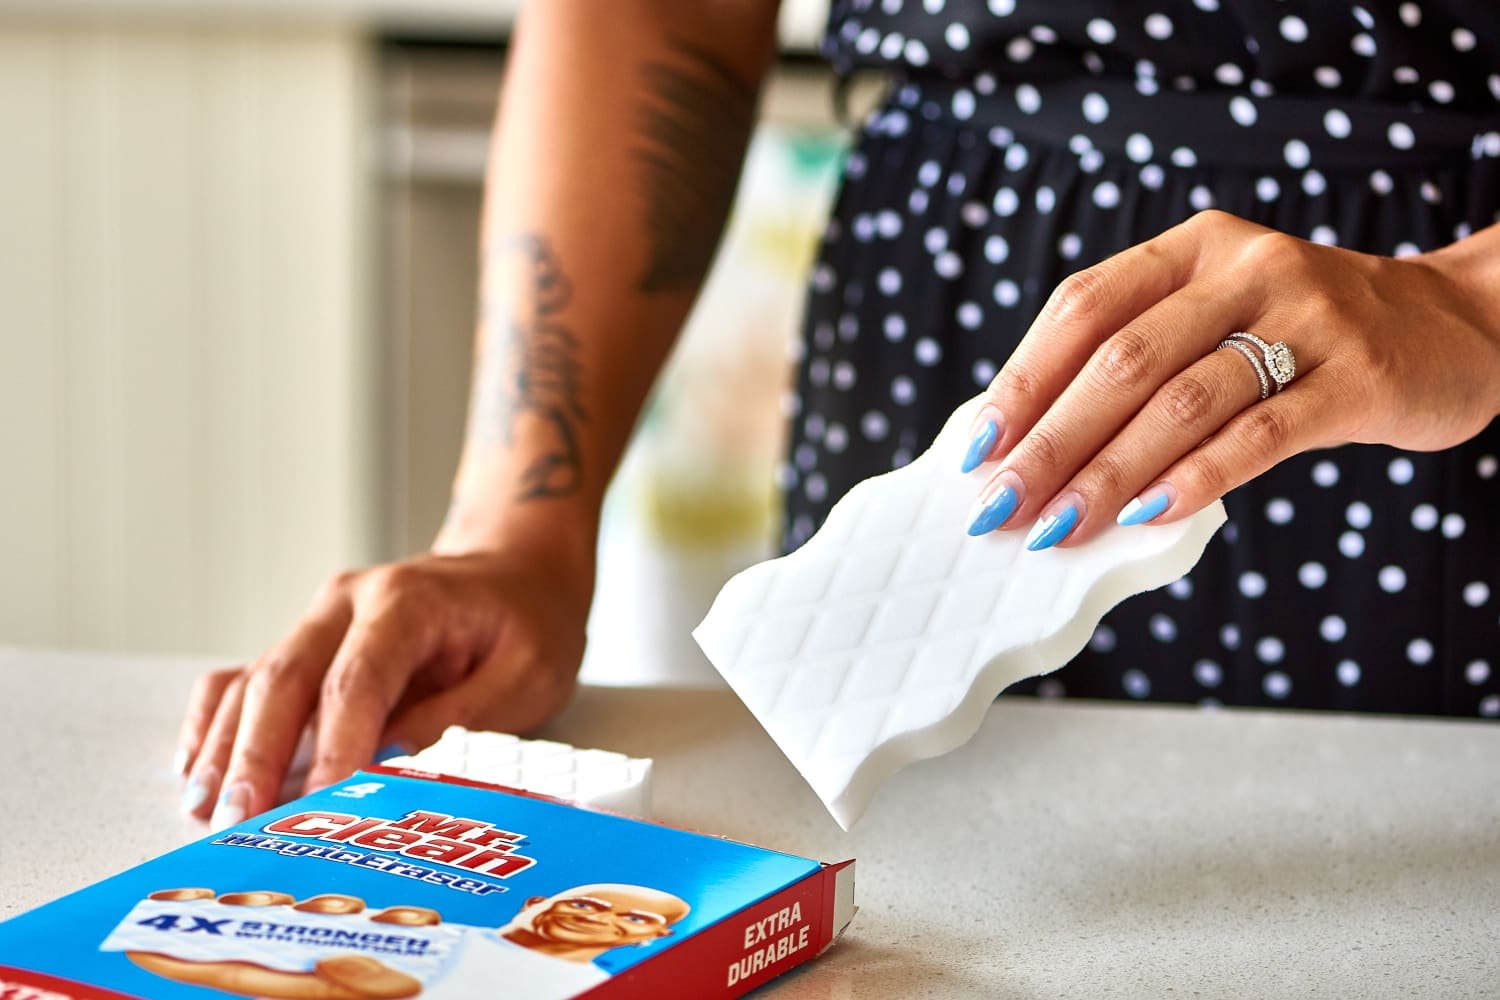 The First Thing You Should Do with a New Mr. Clean Magic Eraser